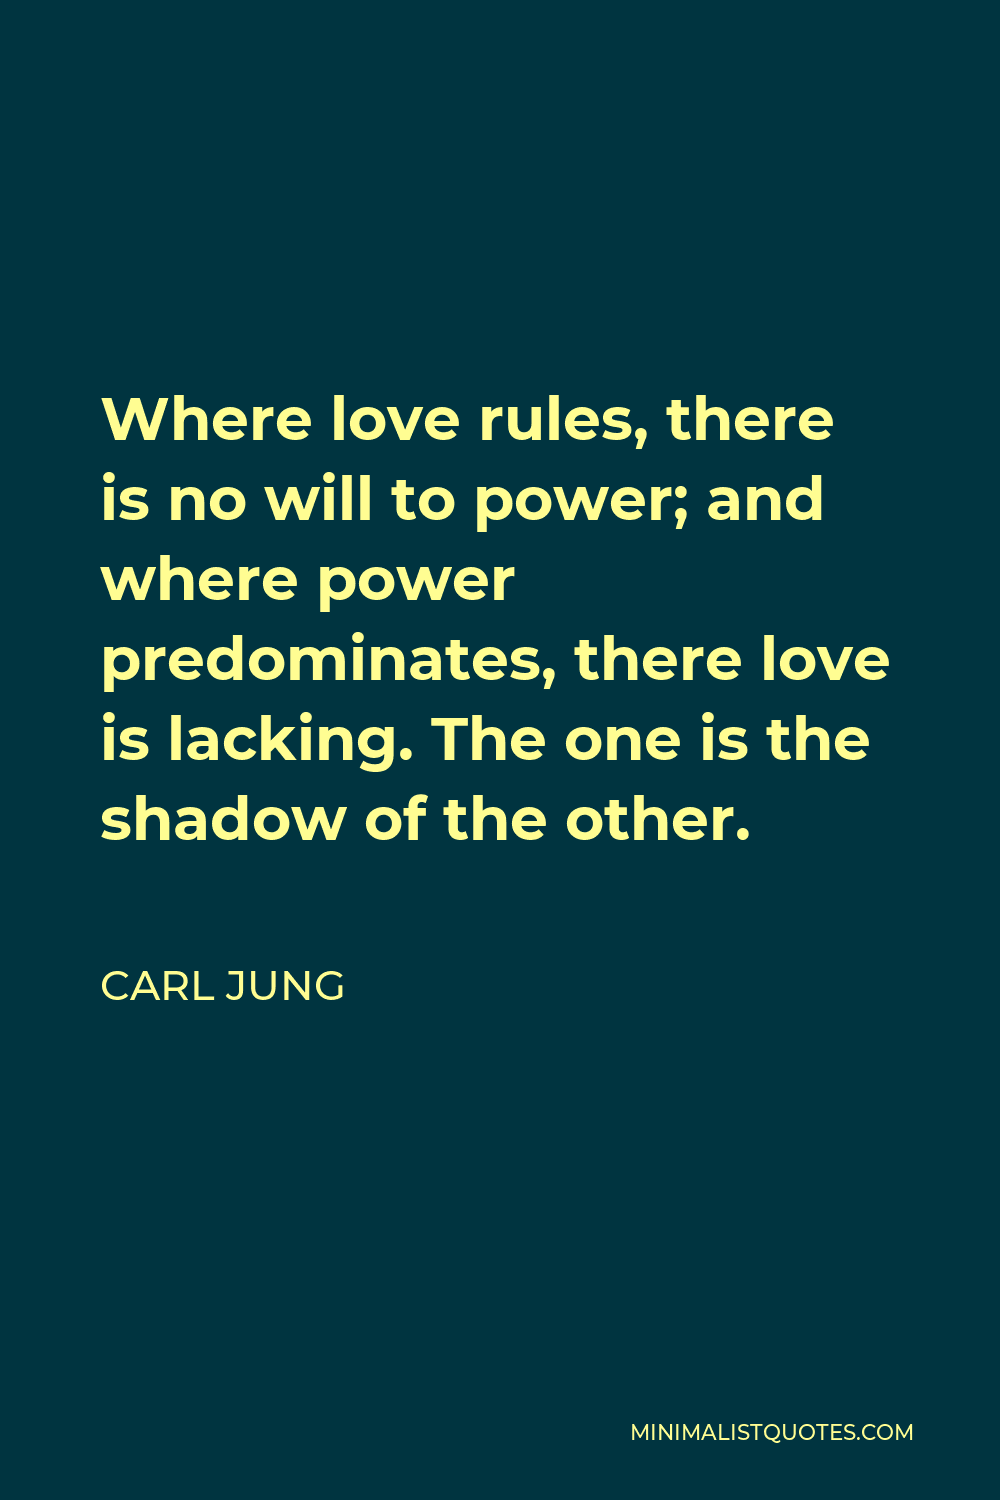 Carl Jung Quote - Where love rules, there is no will to power; and where power predominates, there love is lacking. The one is the shadow of the other.